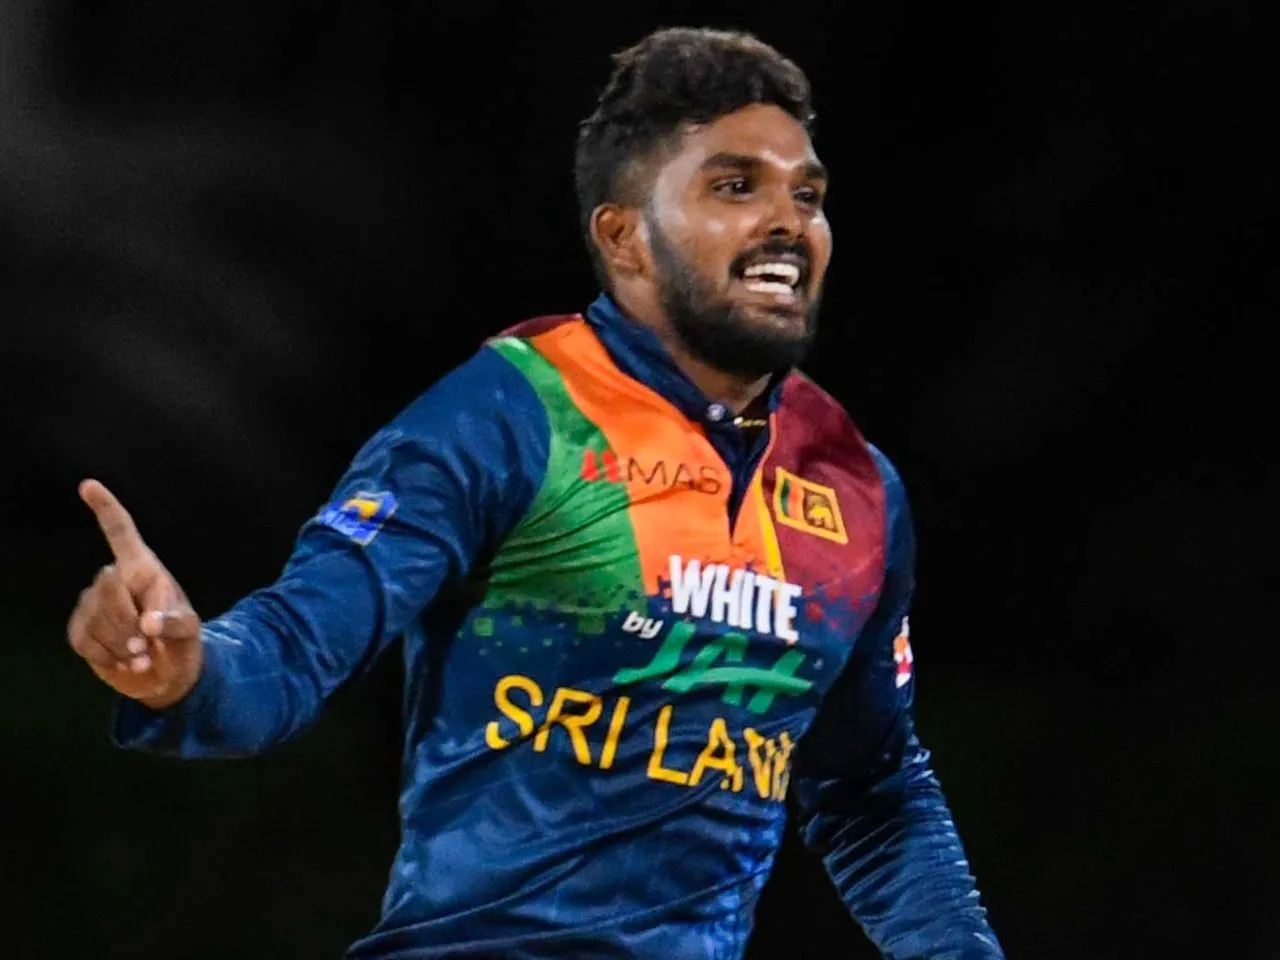 Top 5 bowlers fastest to reach 100 wickets in T20I cricket Featuring  Wanindu Hasaranga